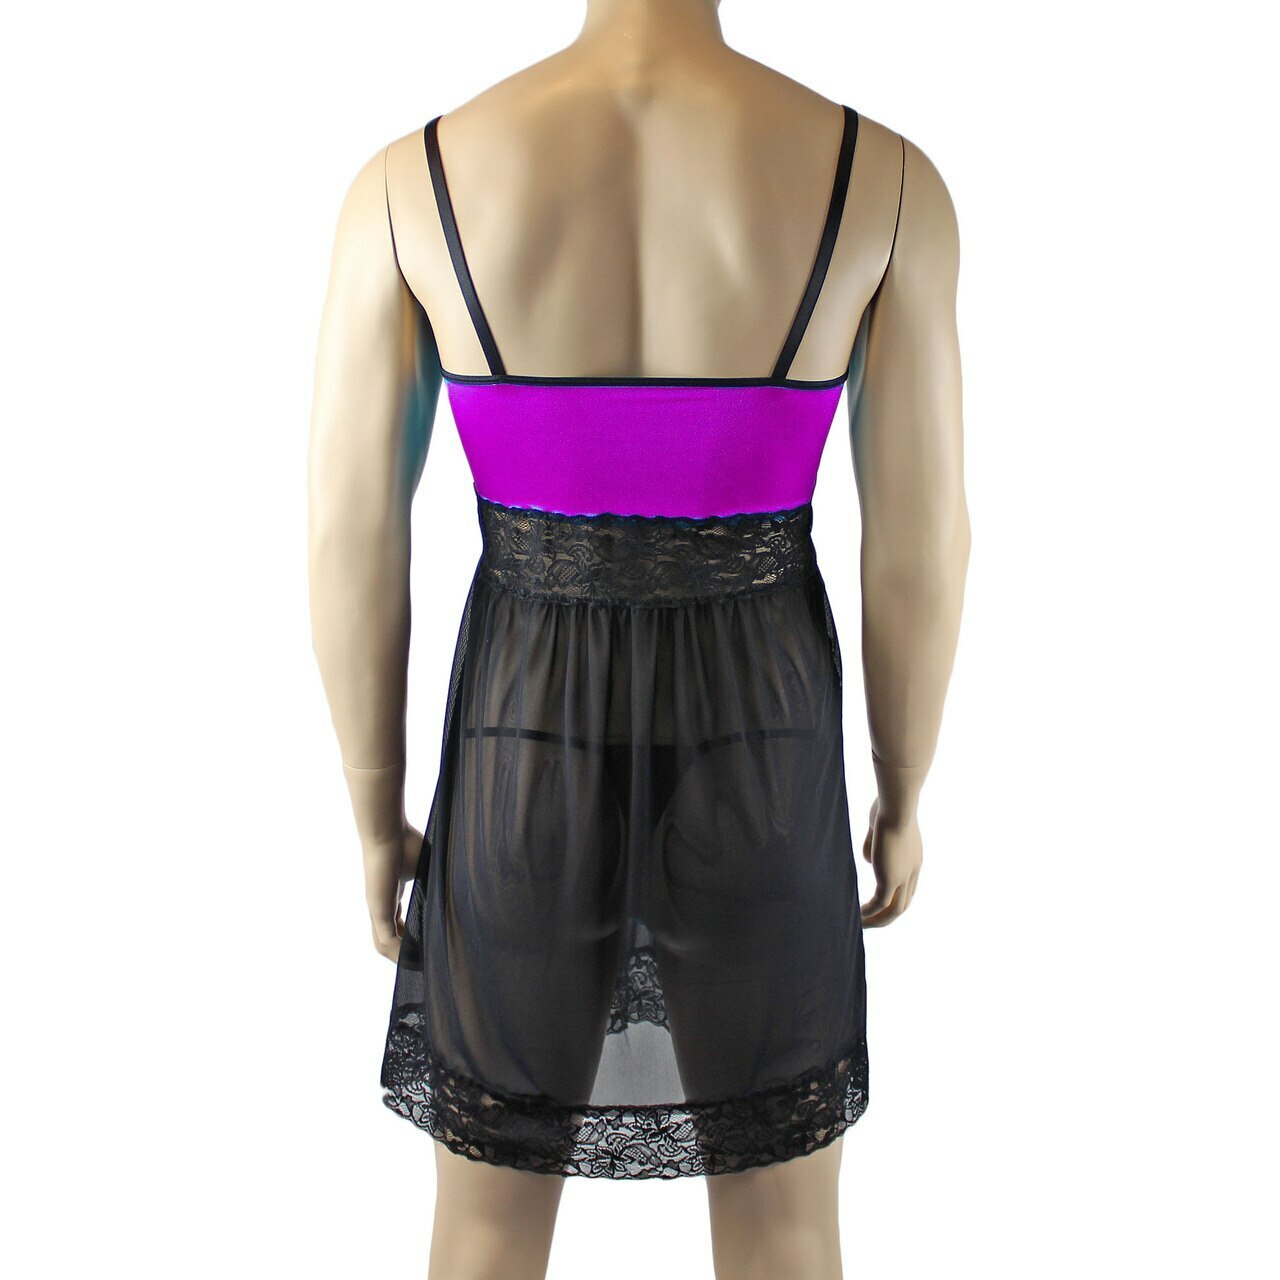 Mens Sexy Lingerie Nightwear Chemise with G string (purple plus other colours)